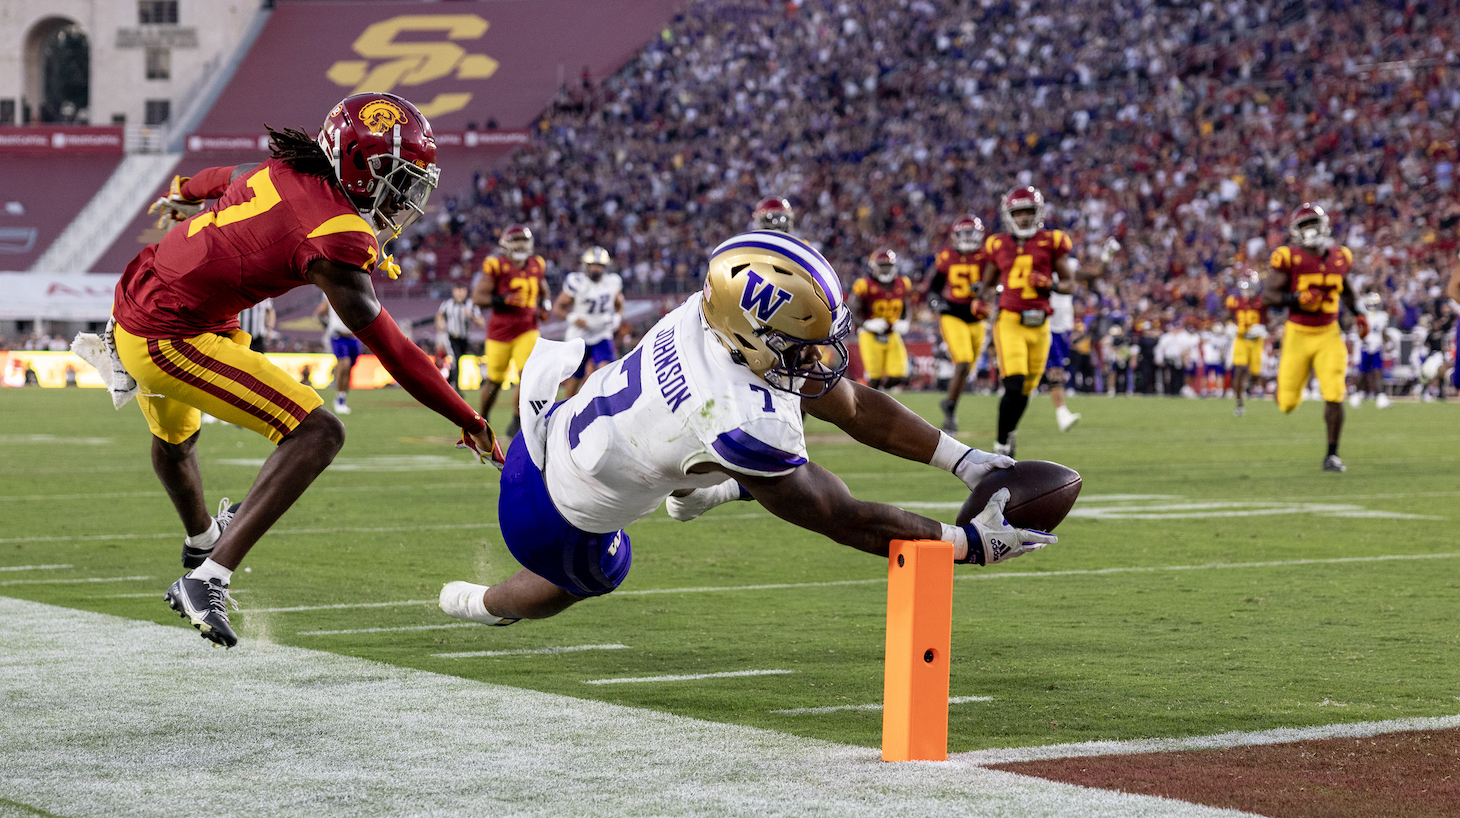 Washington Huskies running back Dillon Johnson (7) scores on a 52-yard-run against USC Trojans safety Calen Bullock (7) in the second quarter at the L.A. Memorial Coliseum November 4, 2023 in Los Angeles, California.